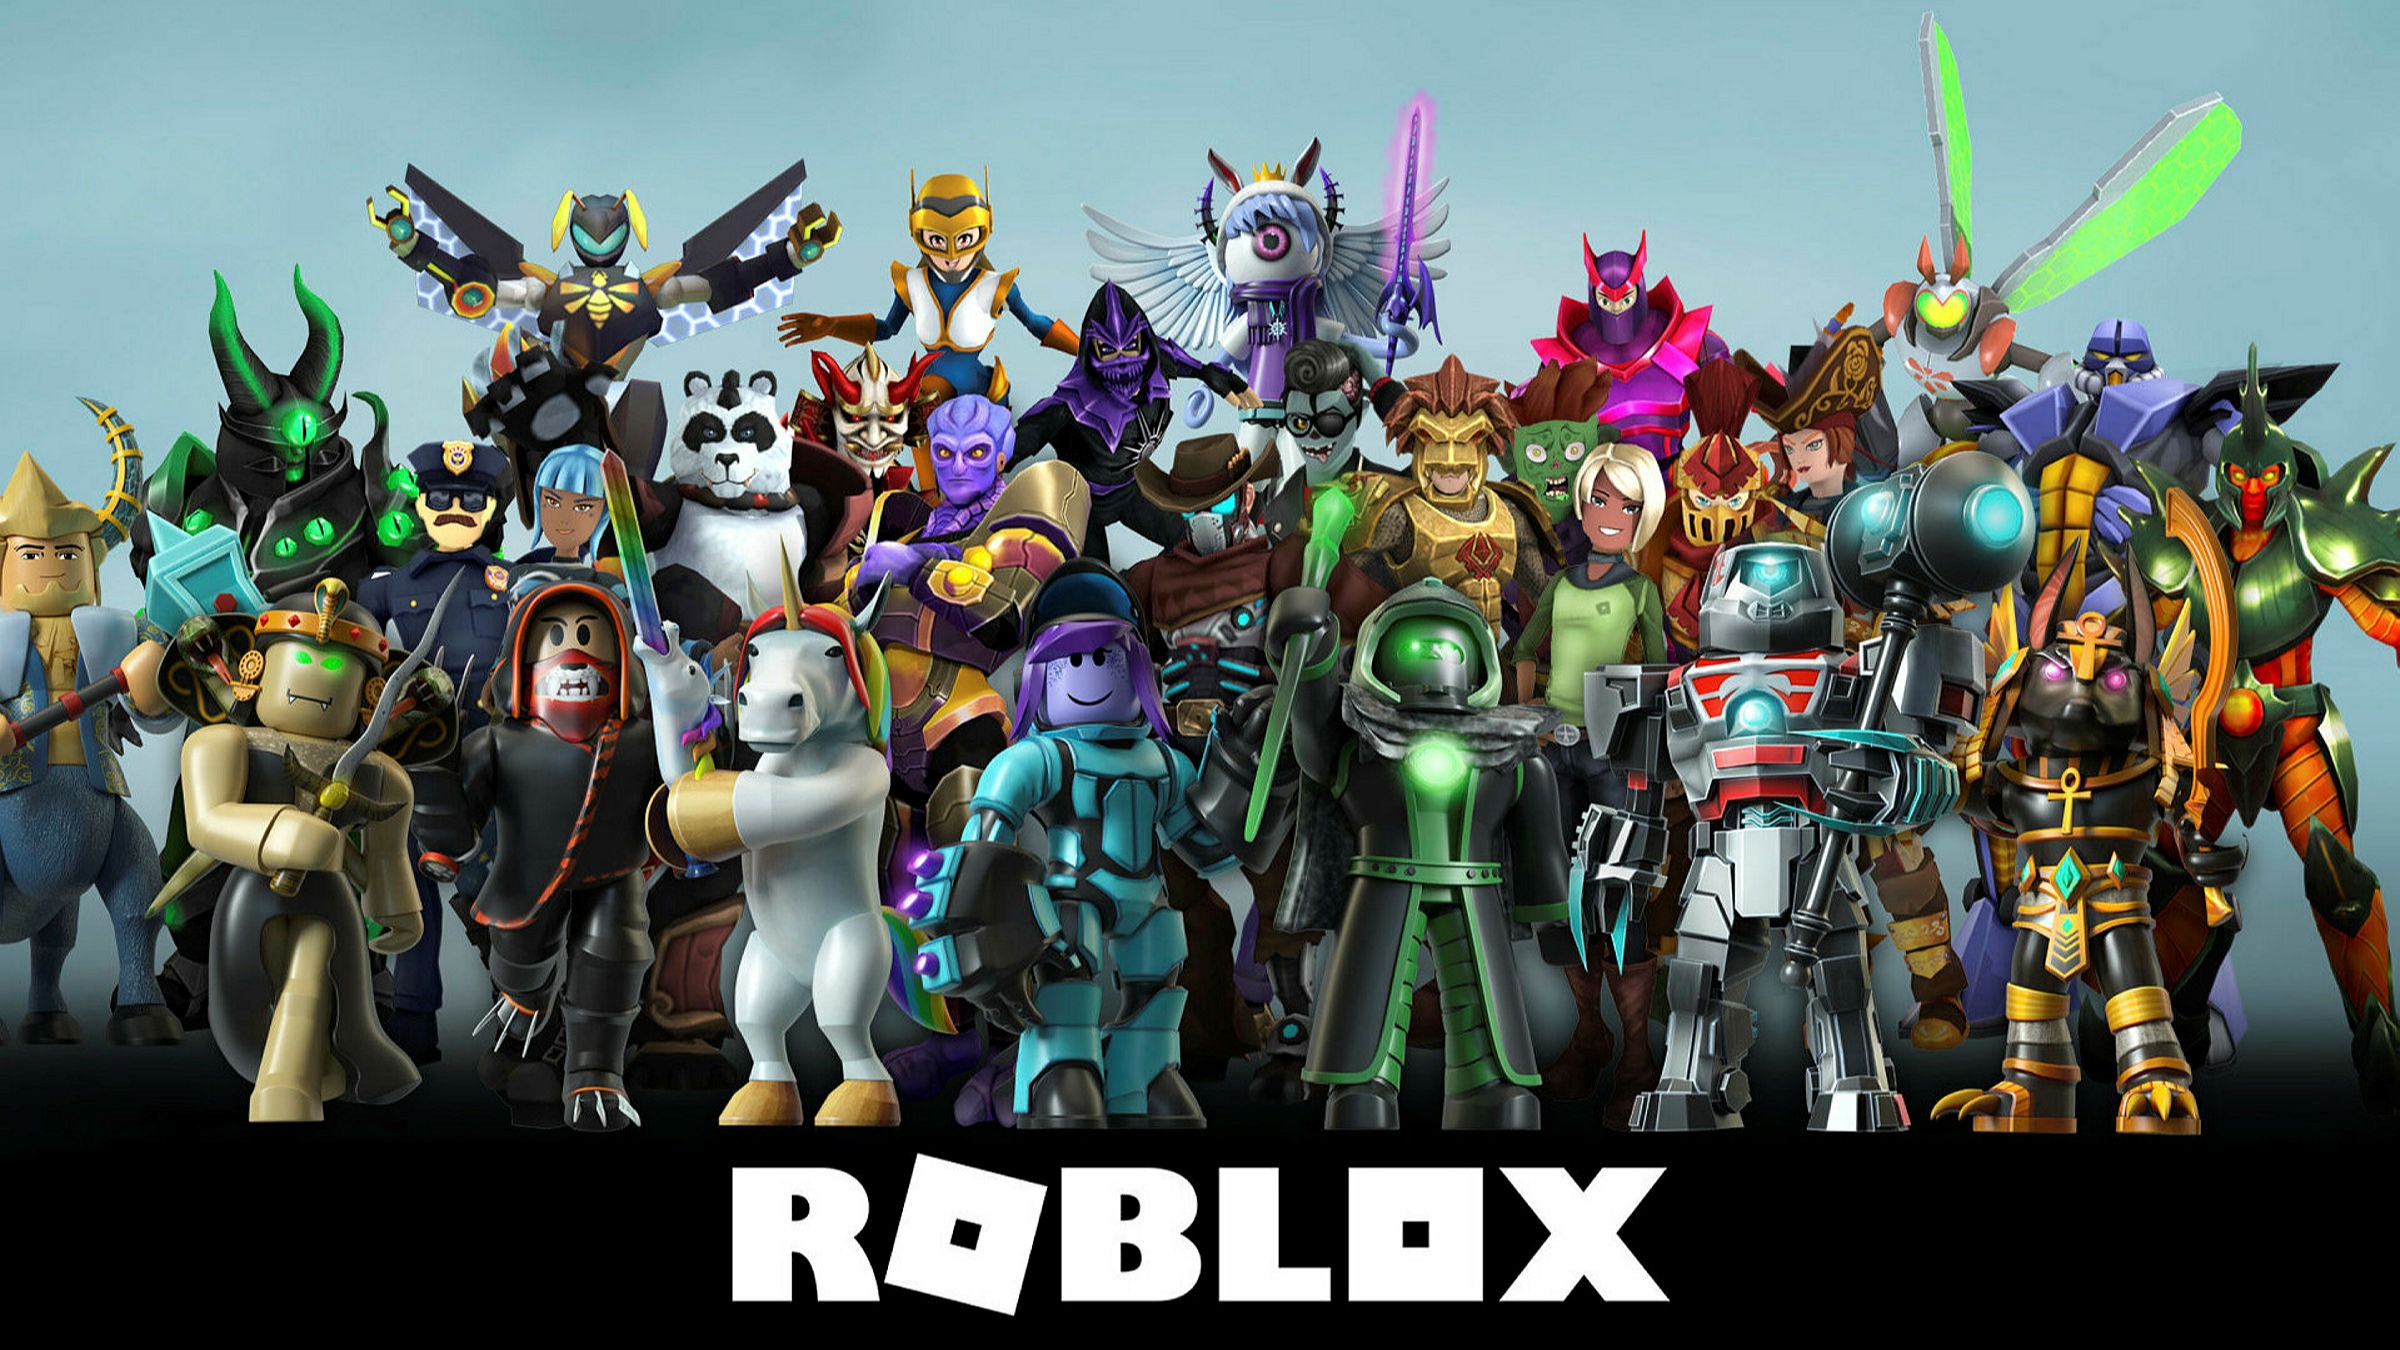 Video Games Top List Of Pocket Money Spending In Lockdown Financial Times - video games roblox logo